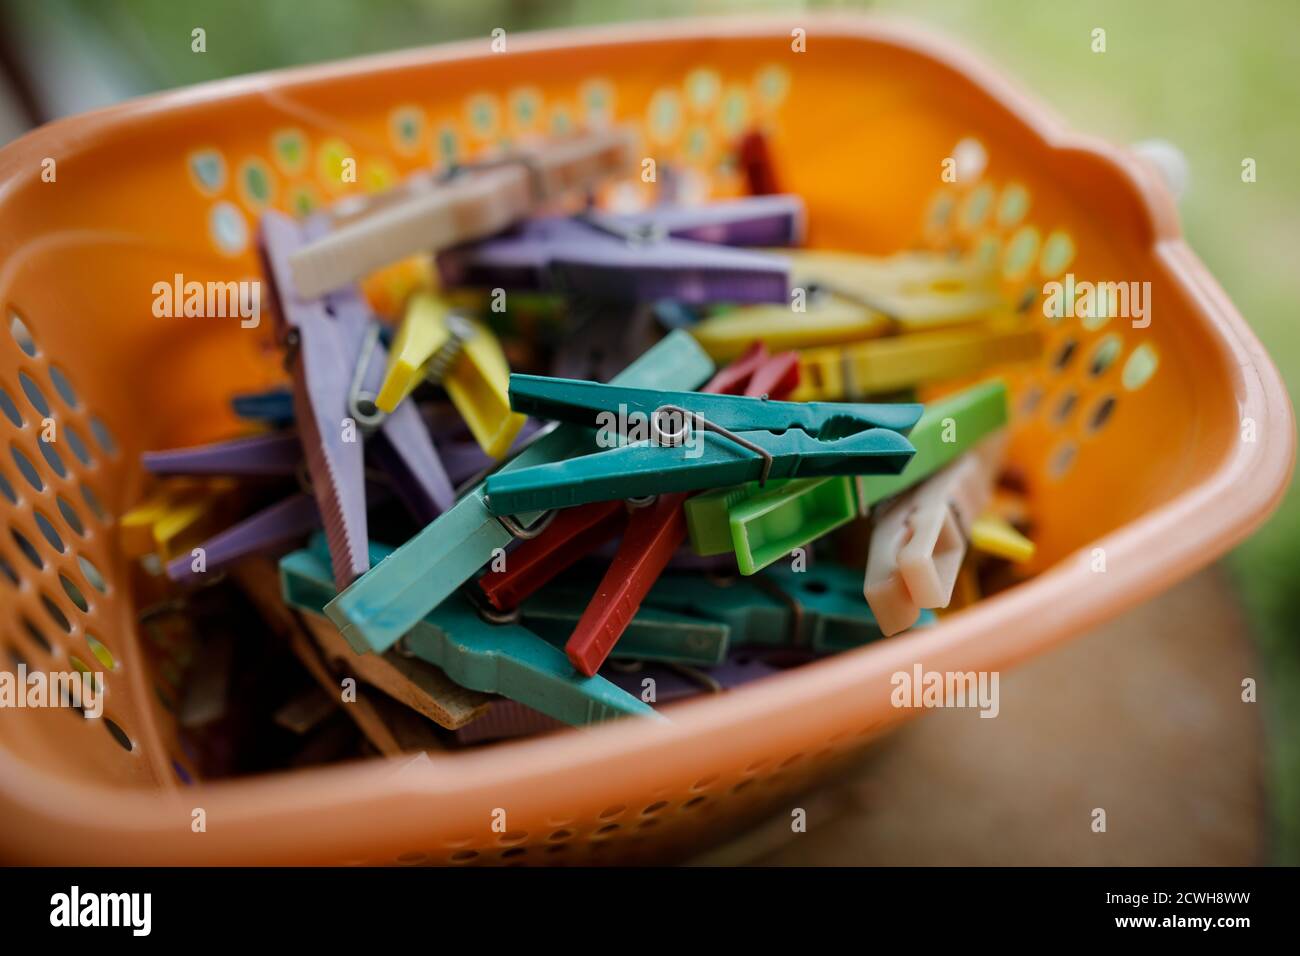 Details with a stack of plastic clothes pegs Stock Photo